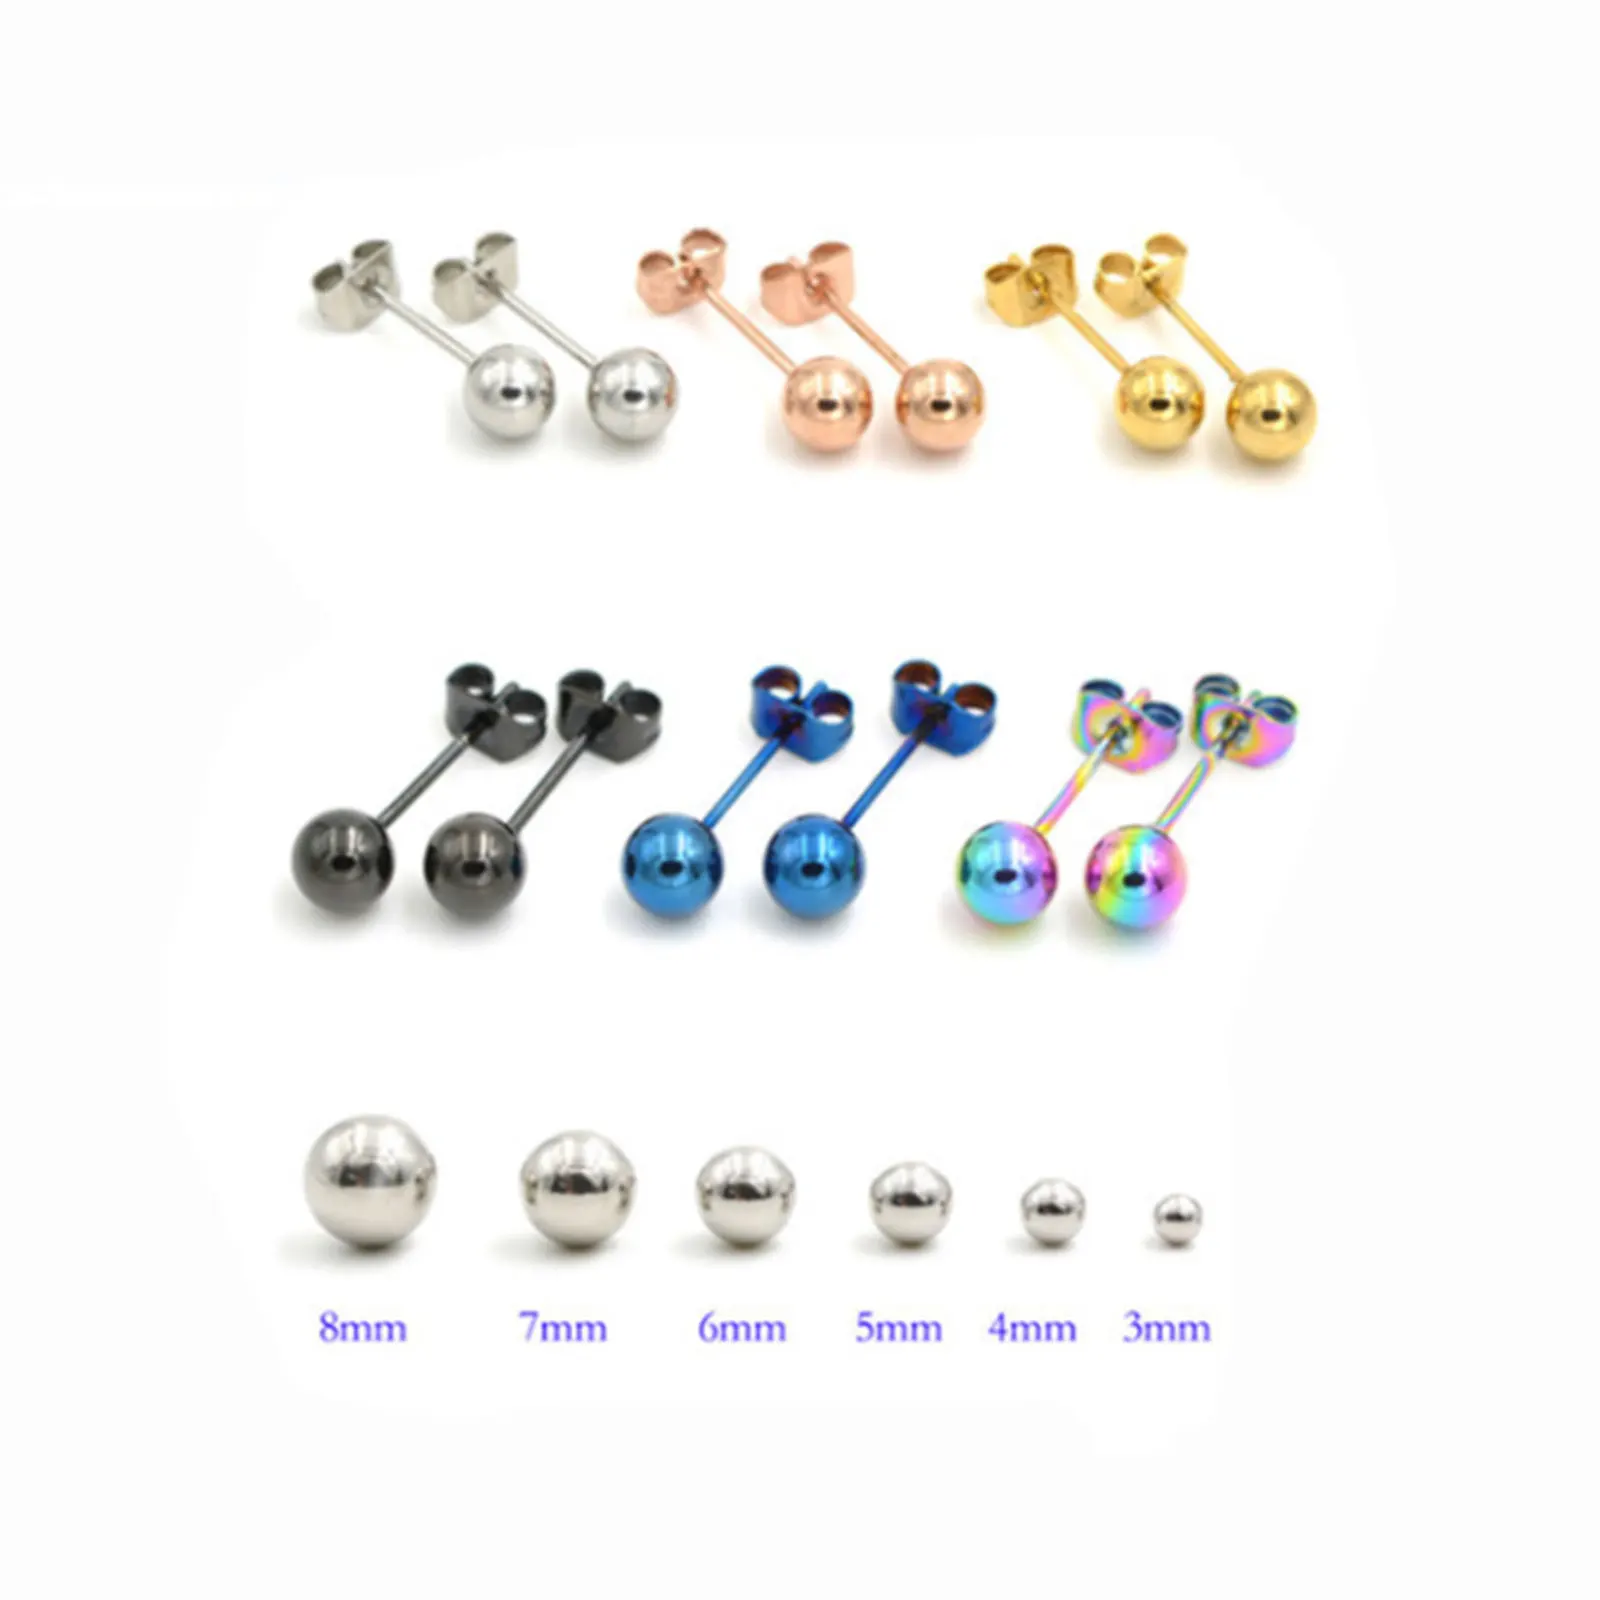 Stainless Steel Ear Post Stud Earrings For Women Men Jewelry Gold Silver Color Ball 2-8mm Dia Fashion Jewelry Wholesale, 1 Pair images - 6